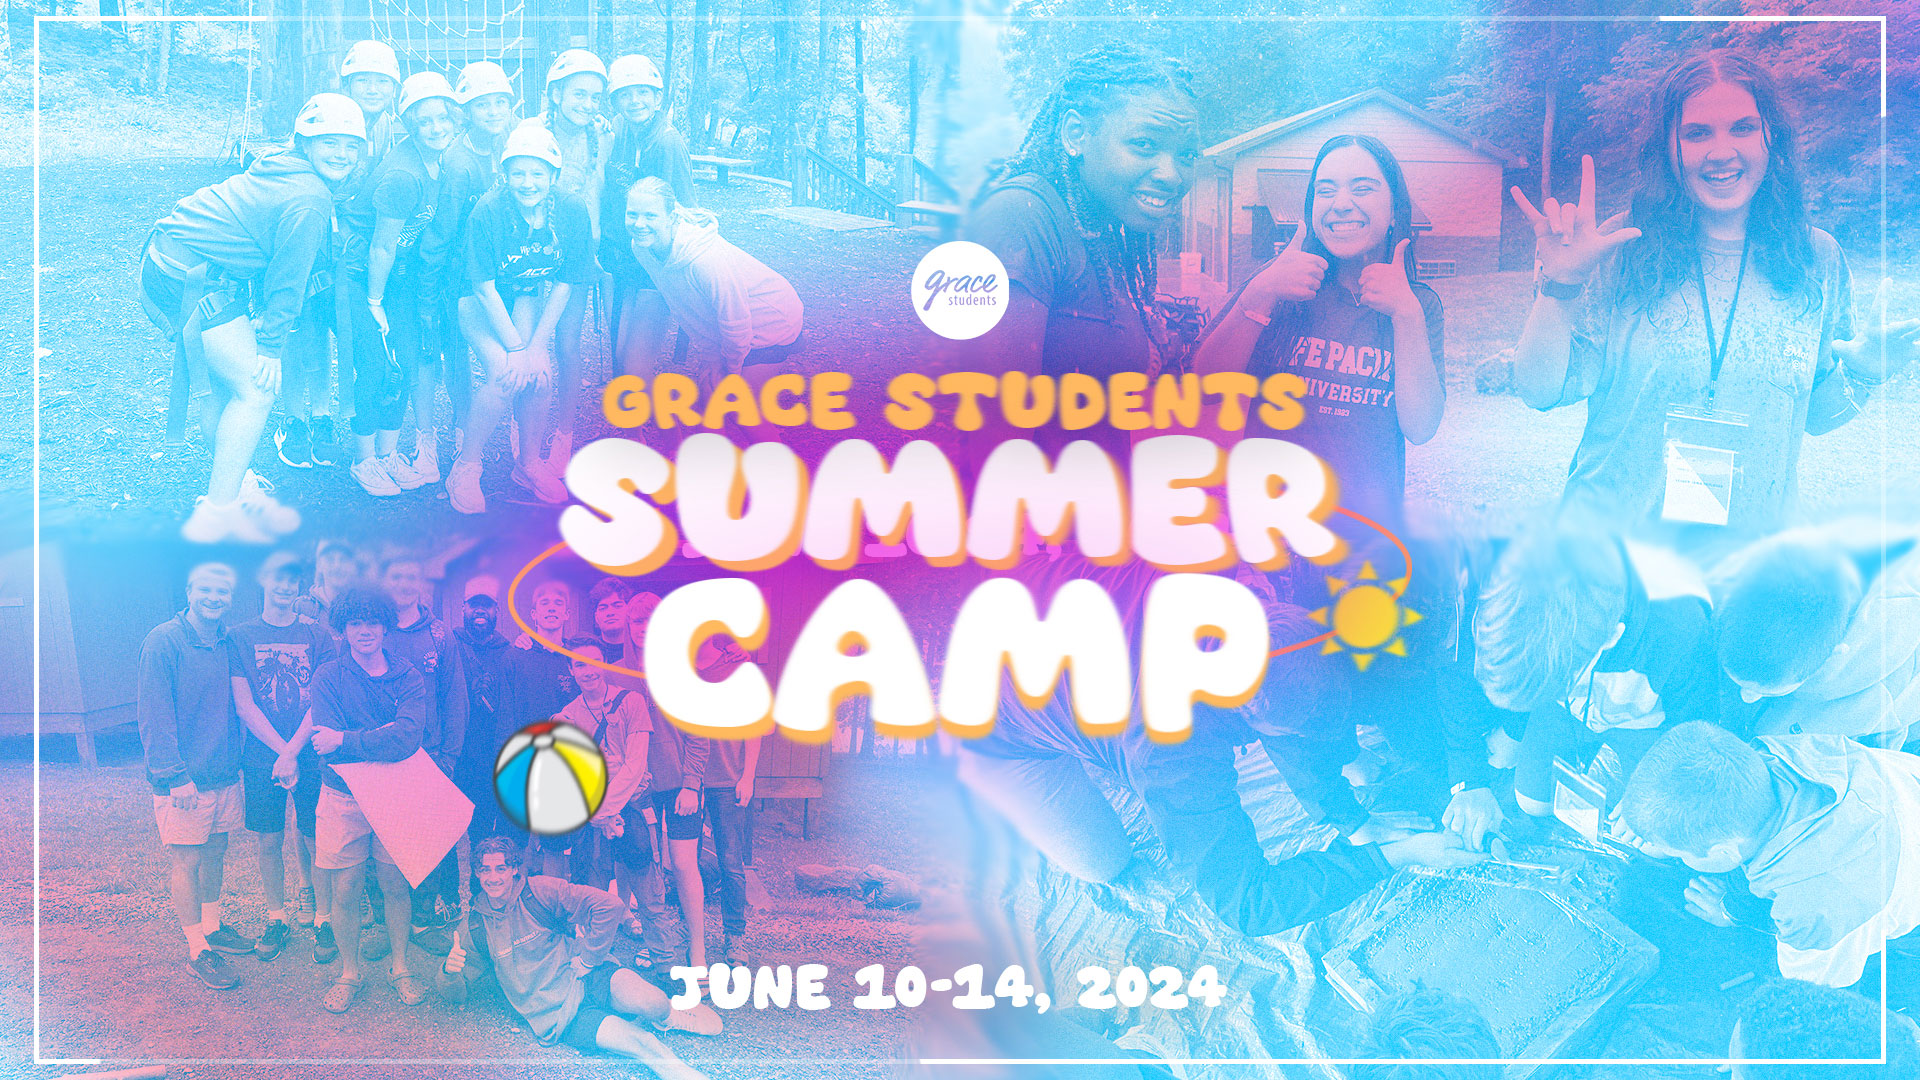 Grace Students Summer Camp